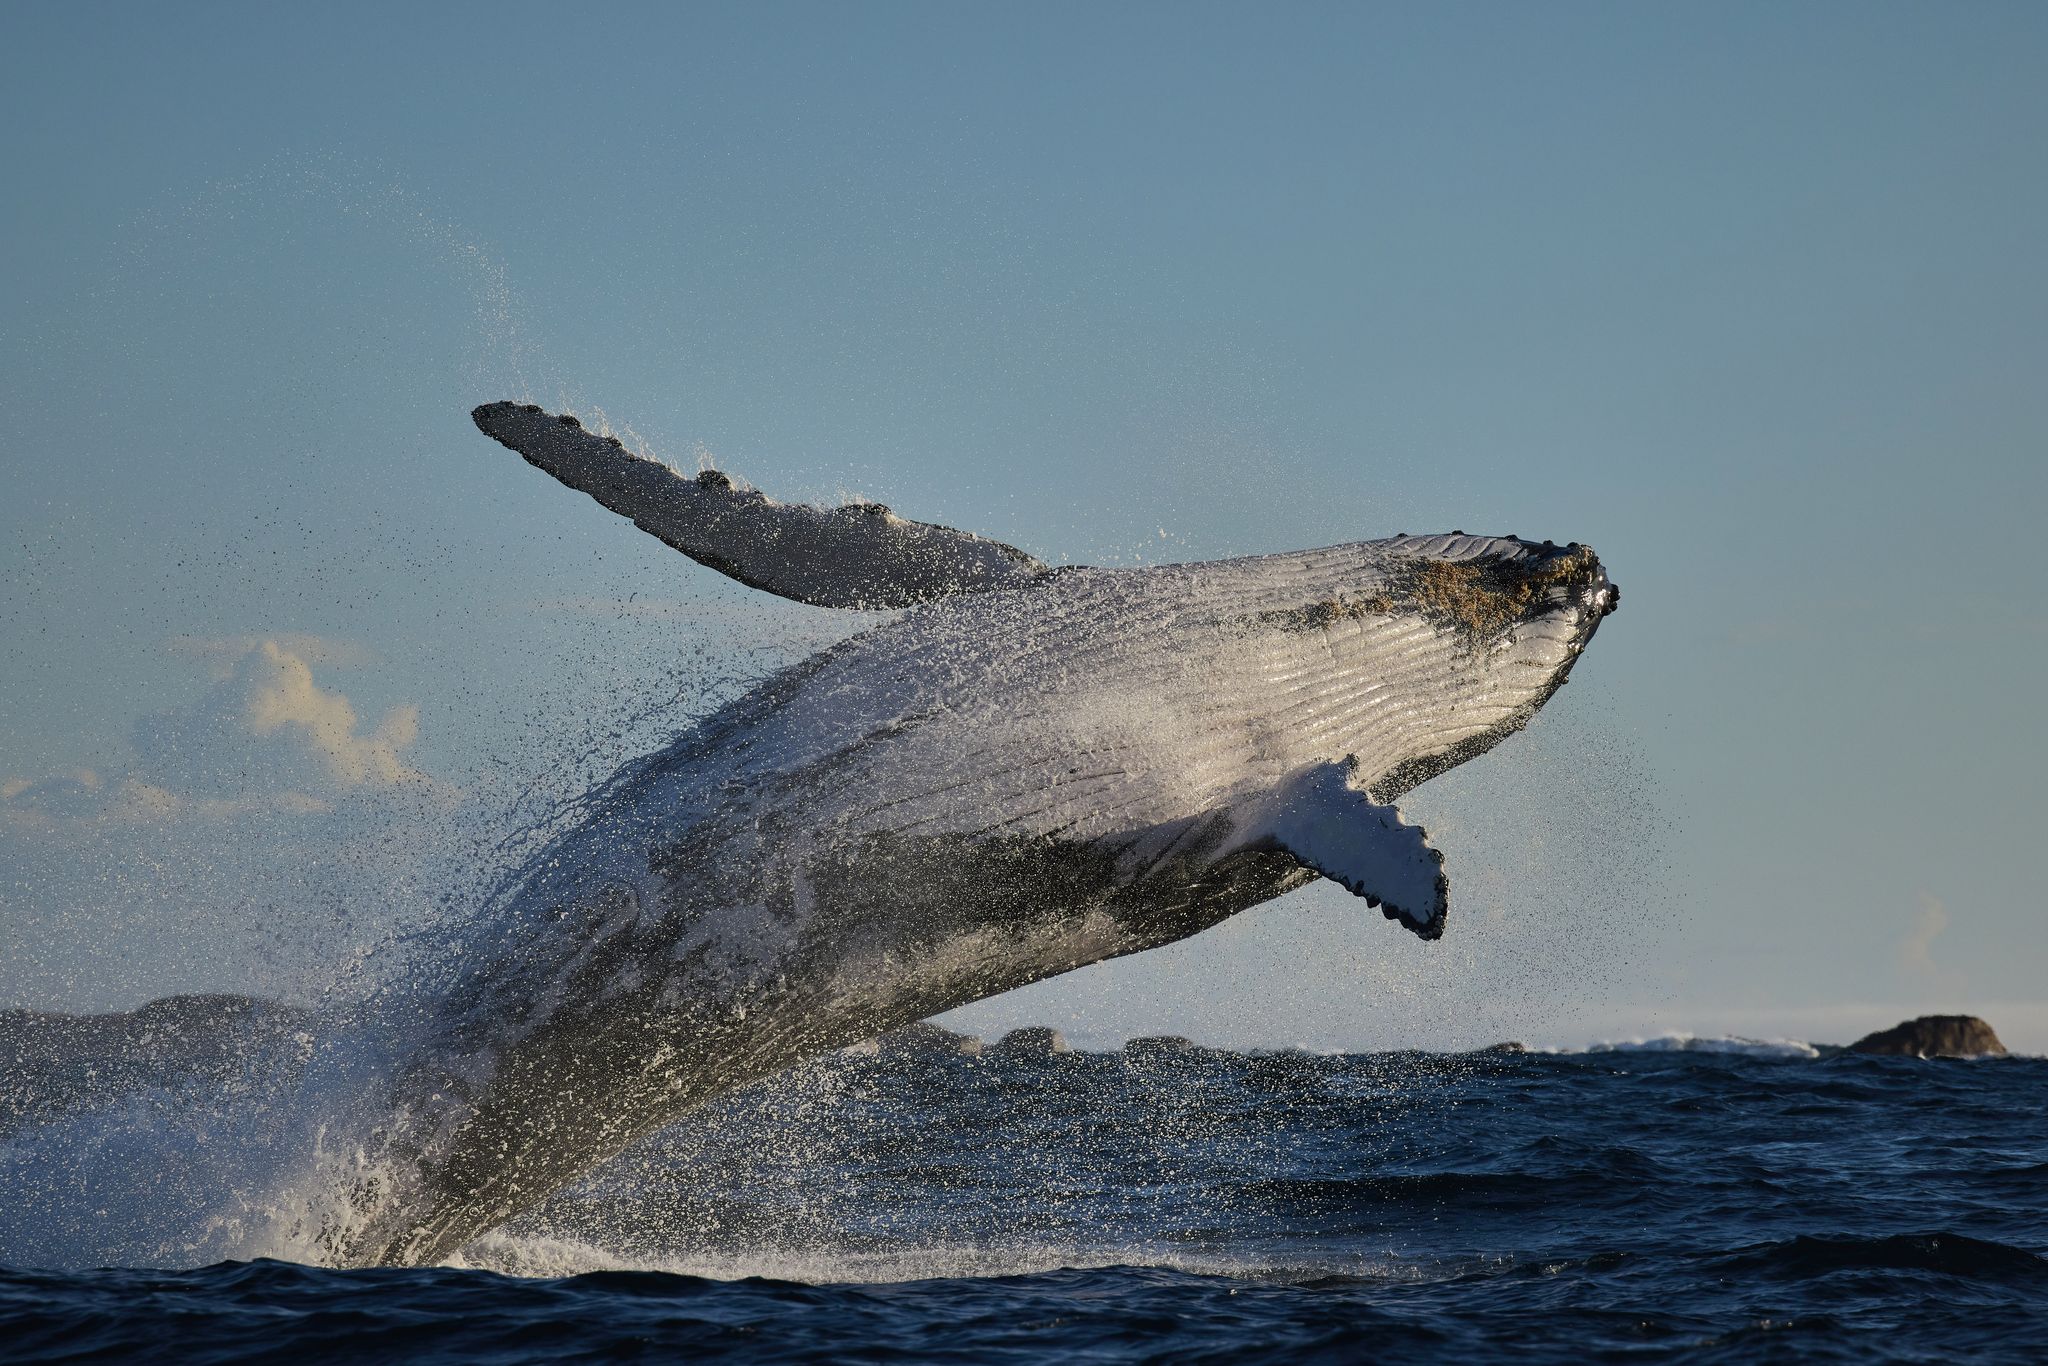 Whale jumping in Augusta. Credit Tim Campbell.